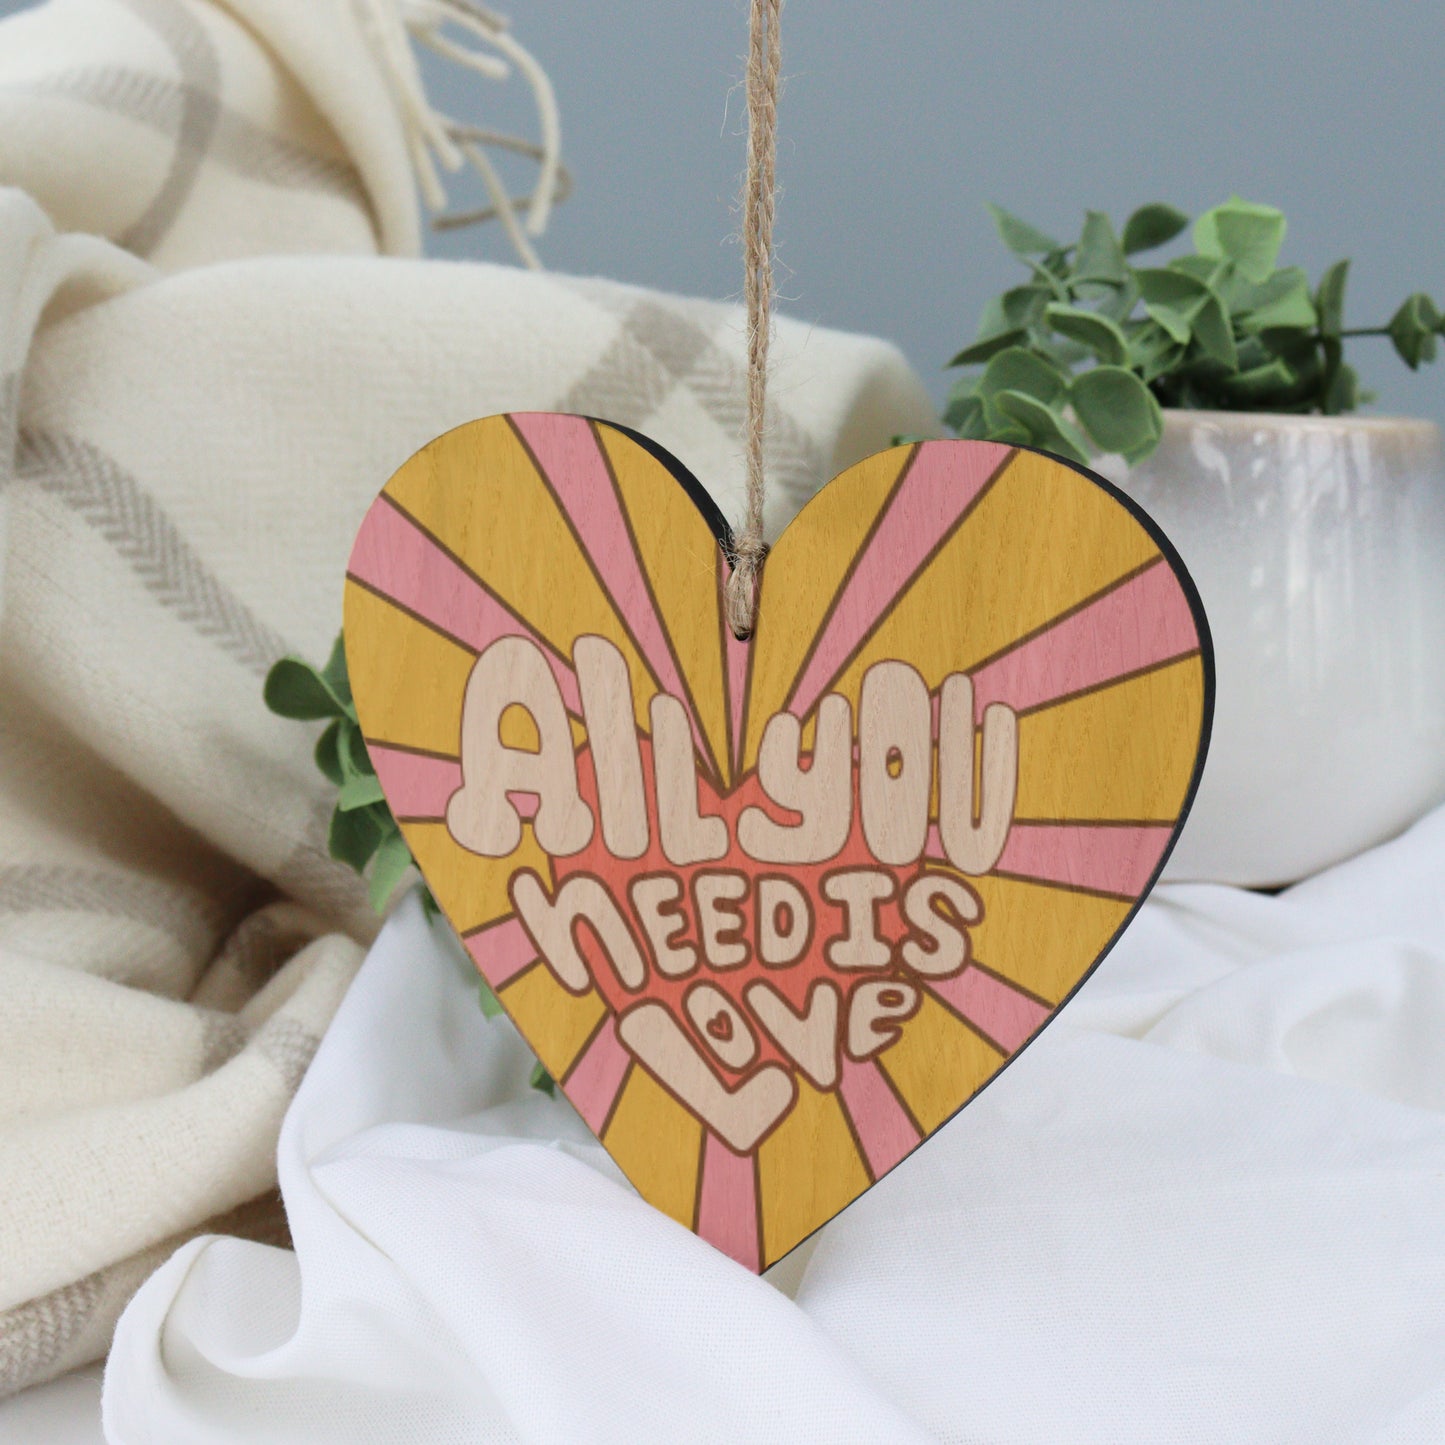 all you need is love retro typography design valentines hanging heart